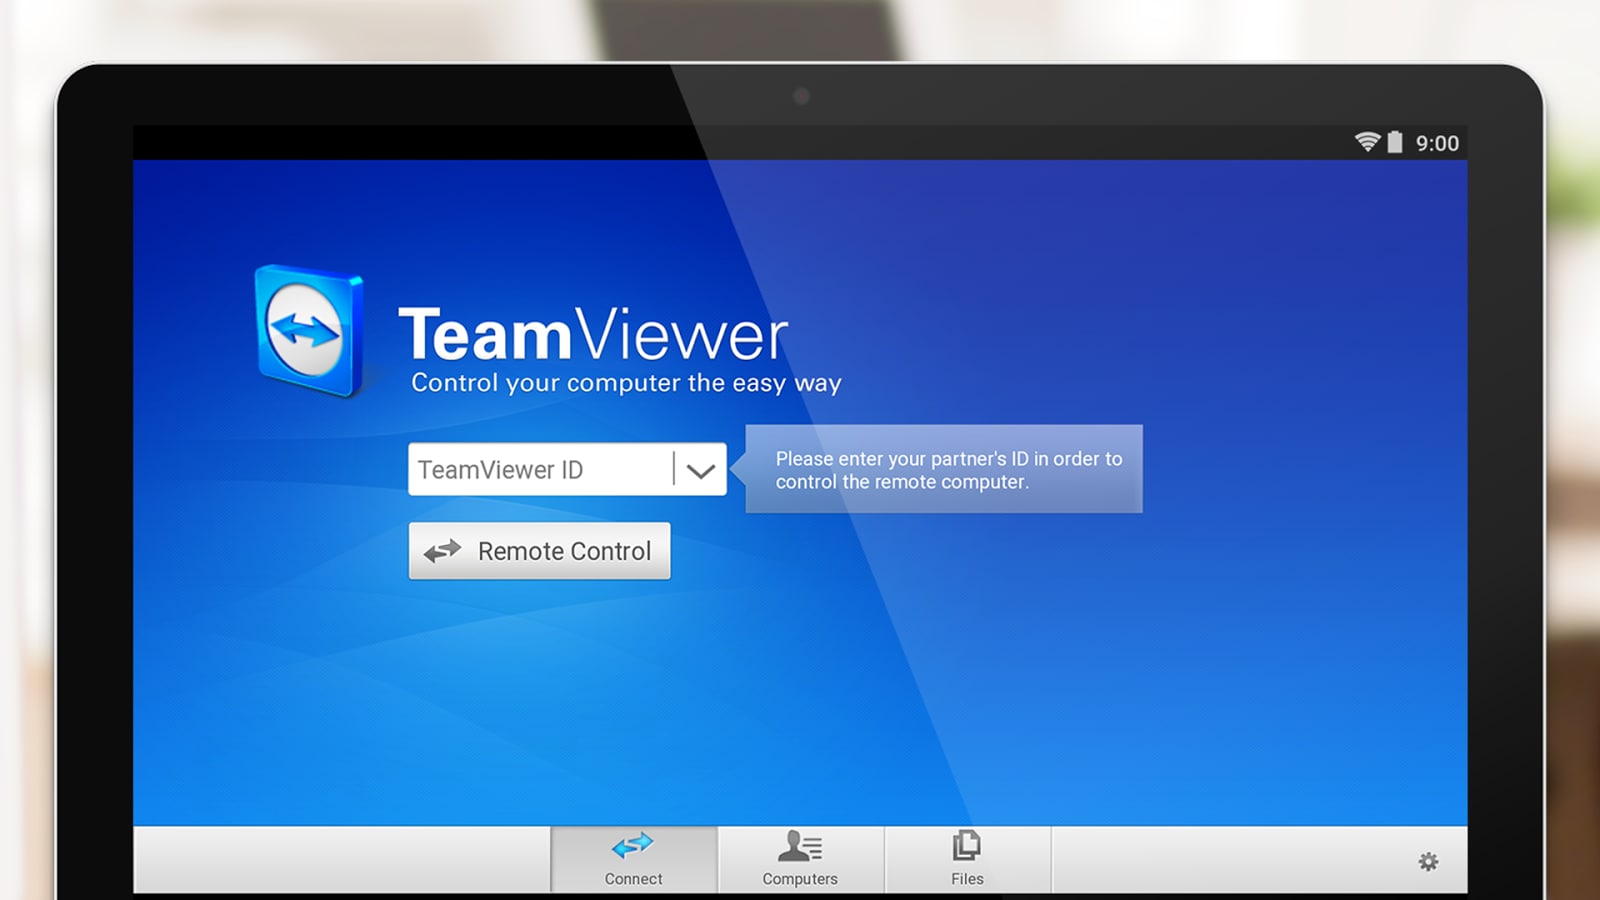 teamviewer download now for free